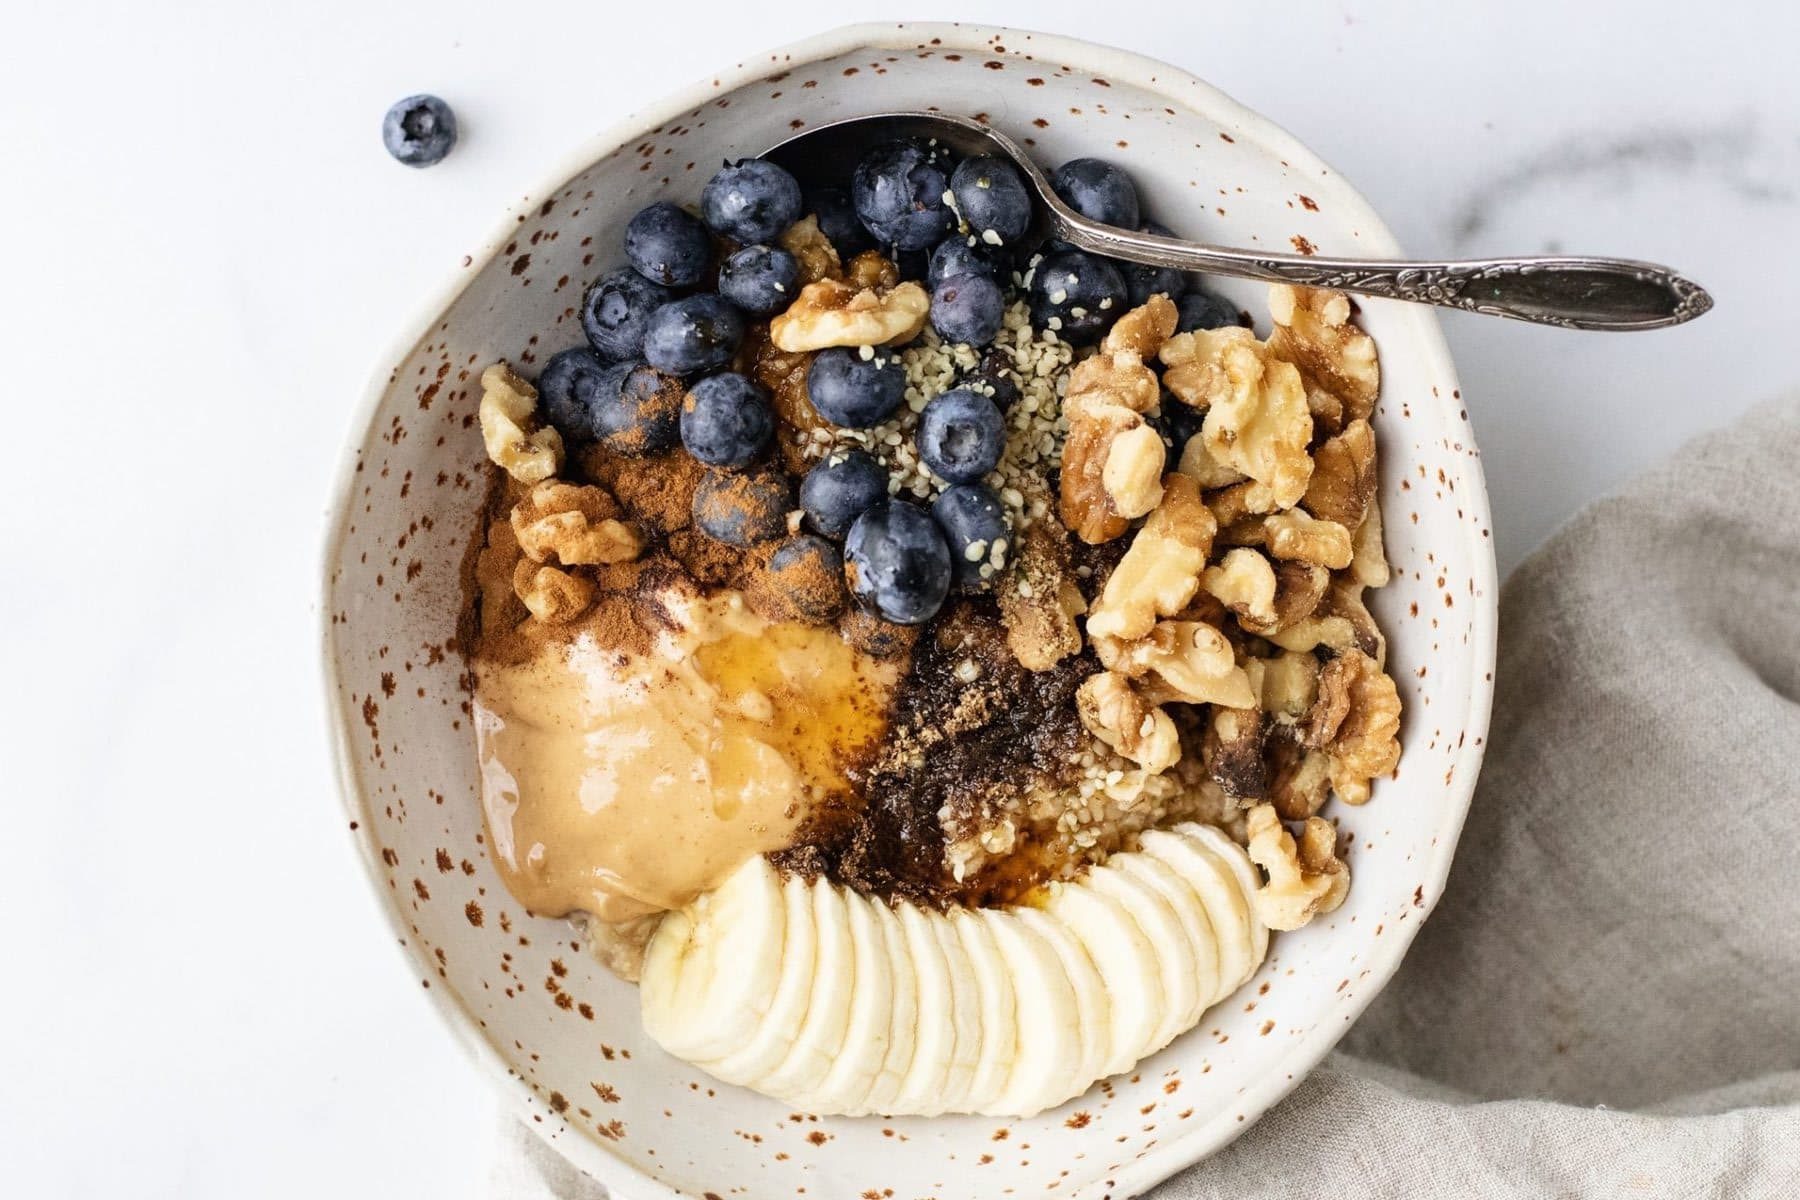 Fruit and Oatmeal Breakfast Bowl Recipe Details